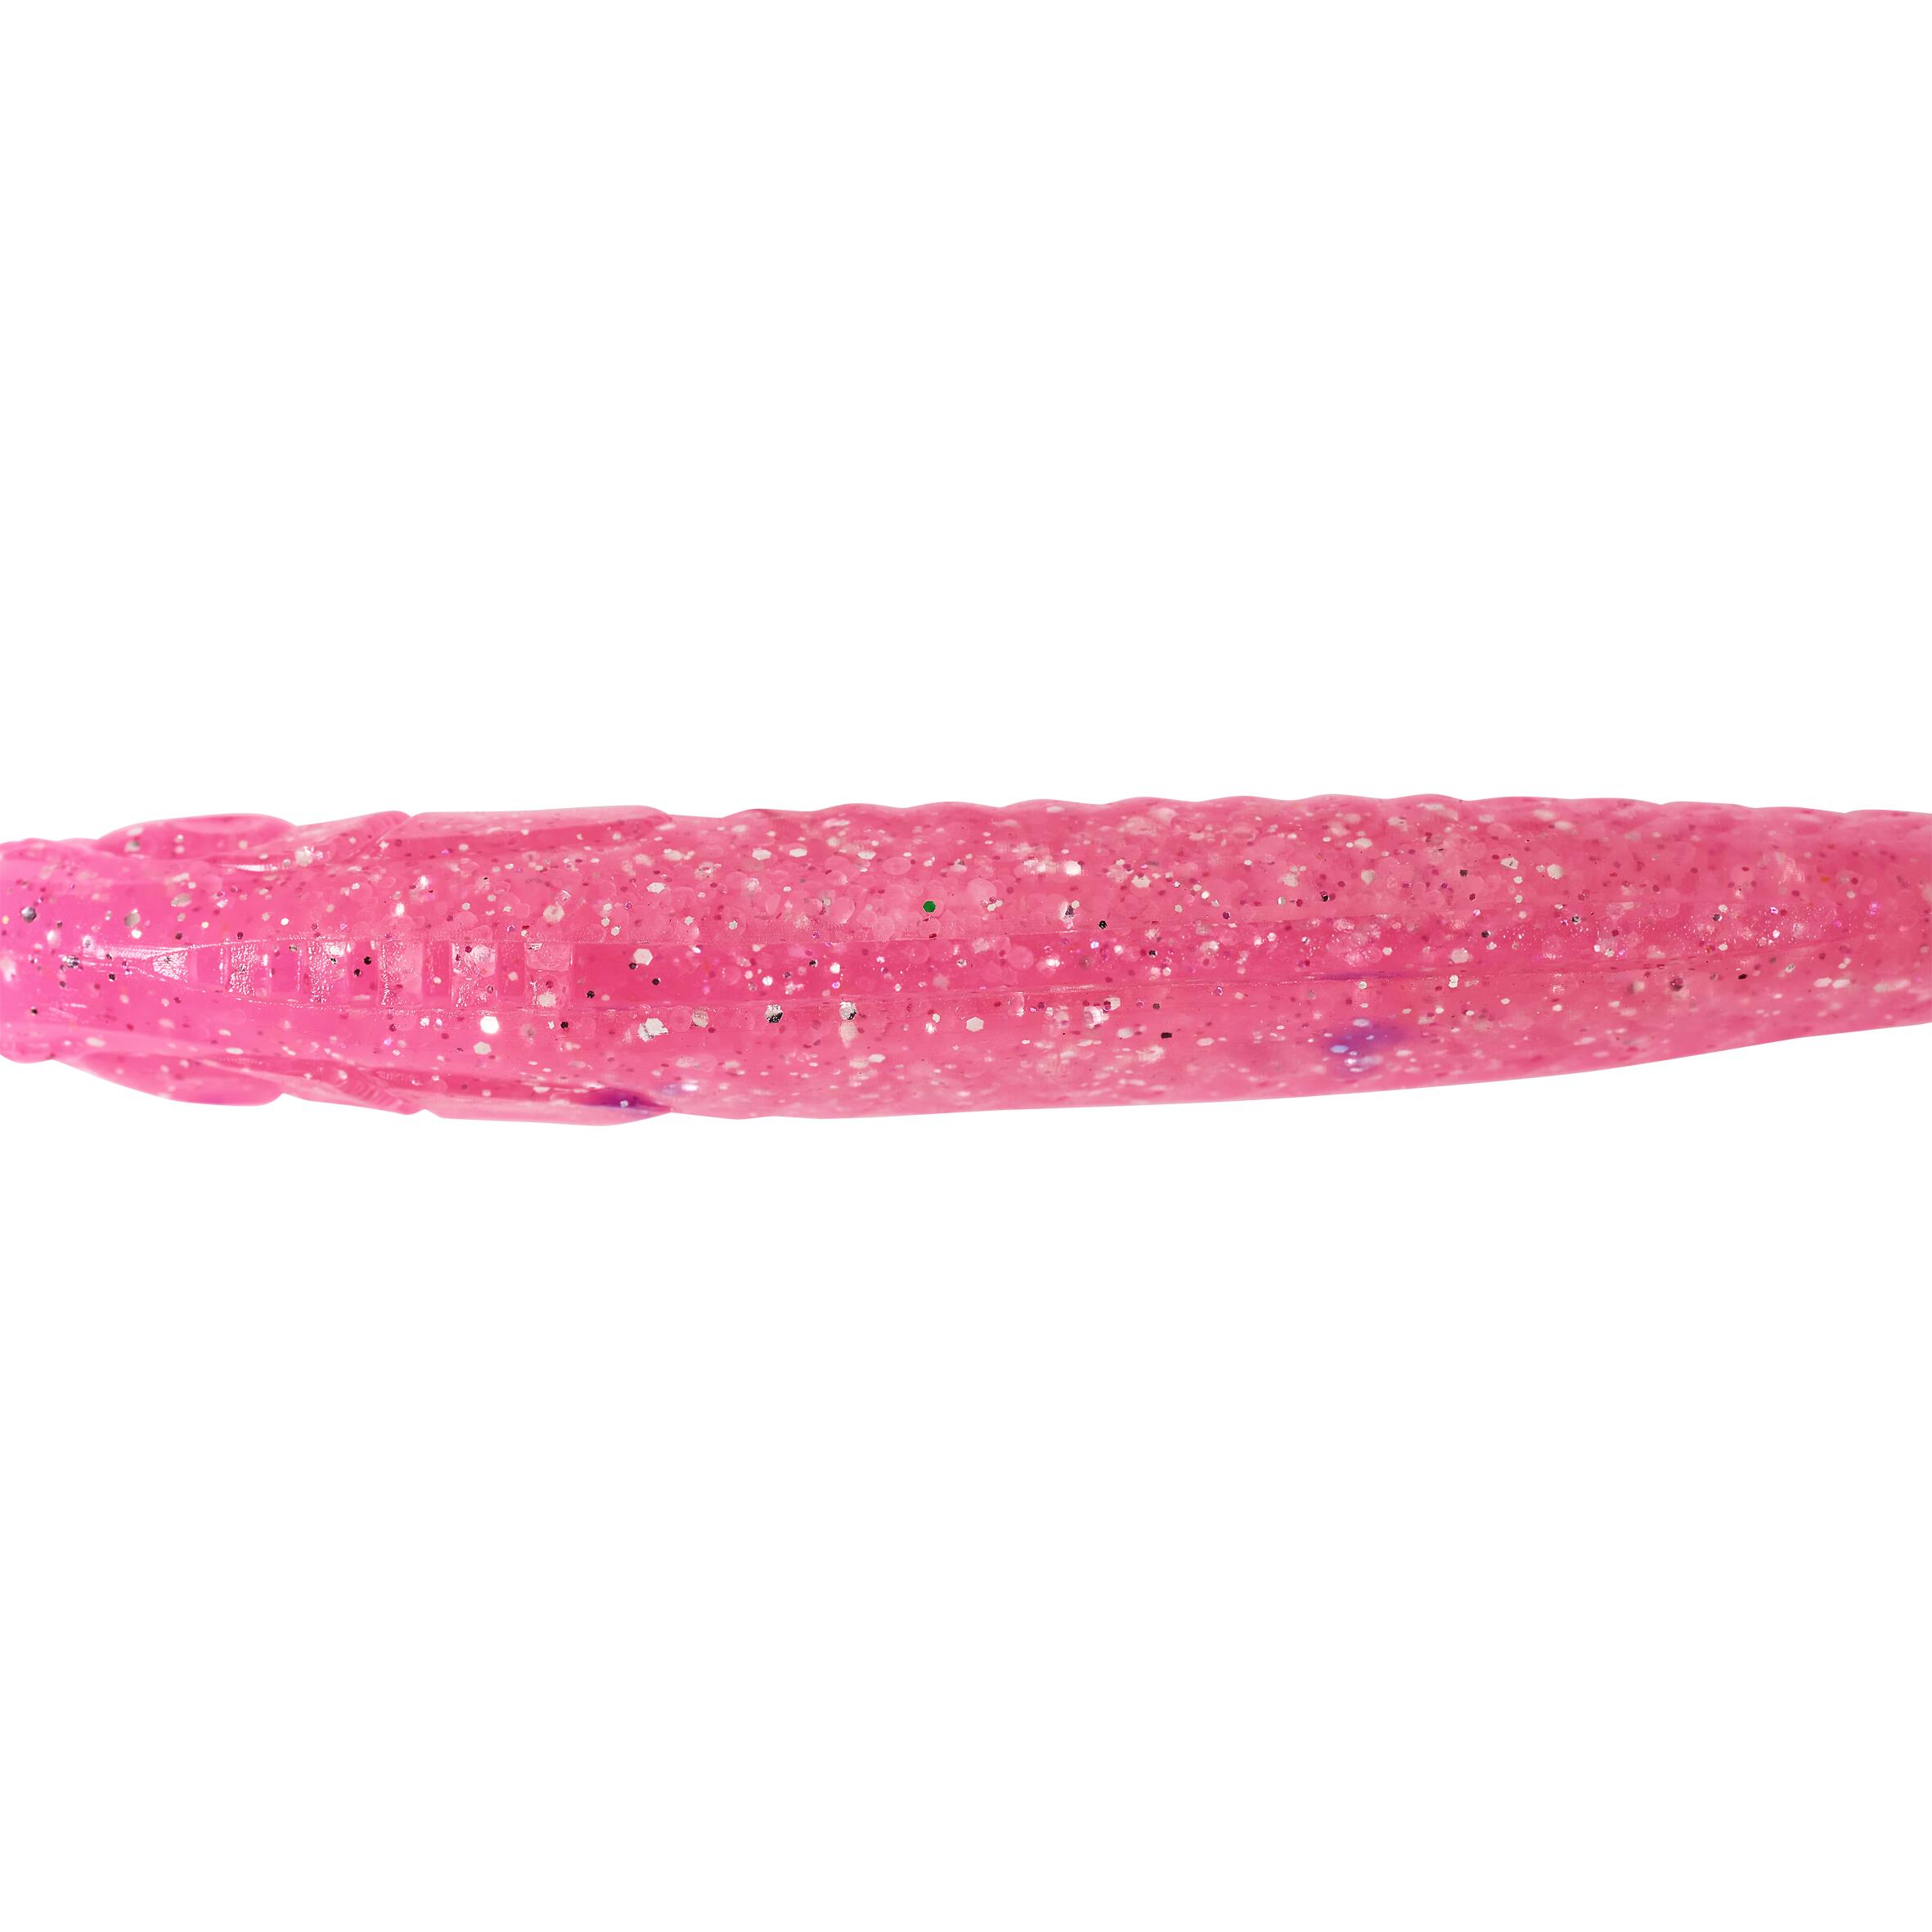 SHAD SOFT LURE WITH WXM YUBARI SHD 100 PINK ATTRACTANT 5/7